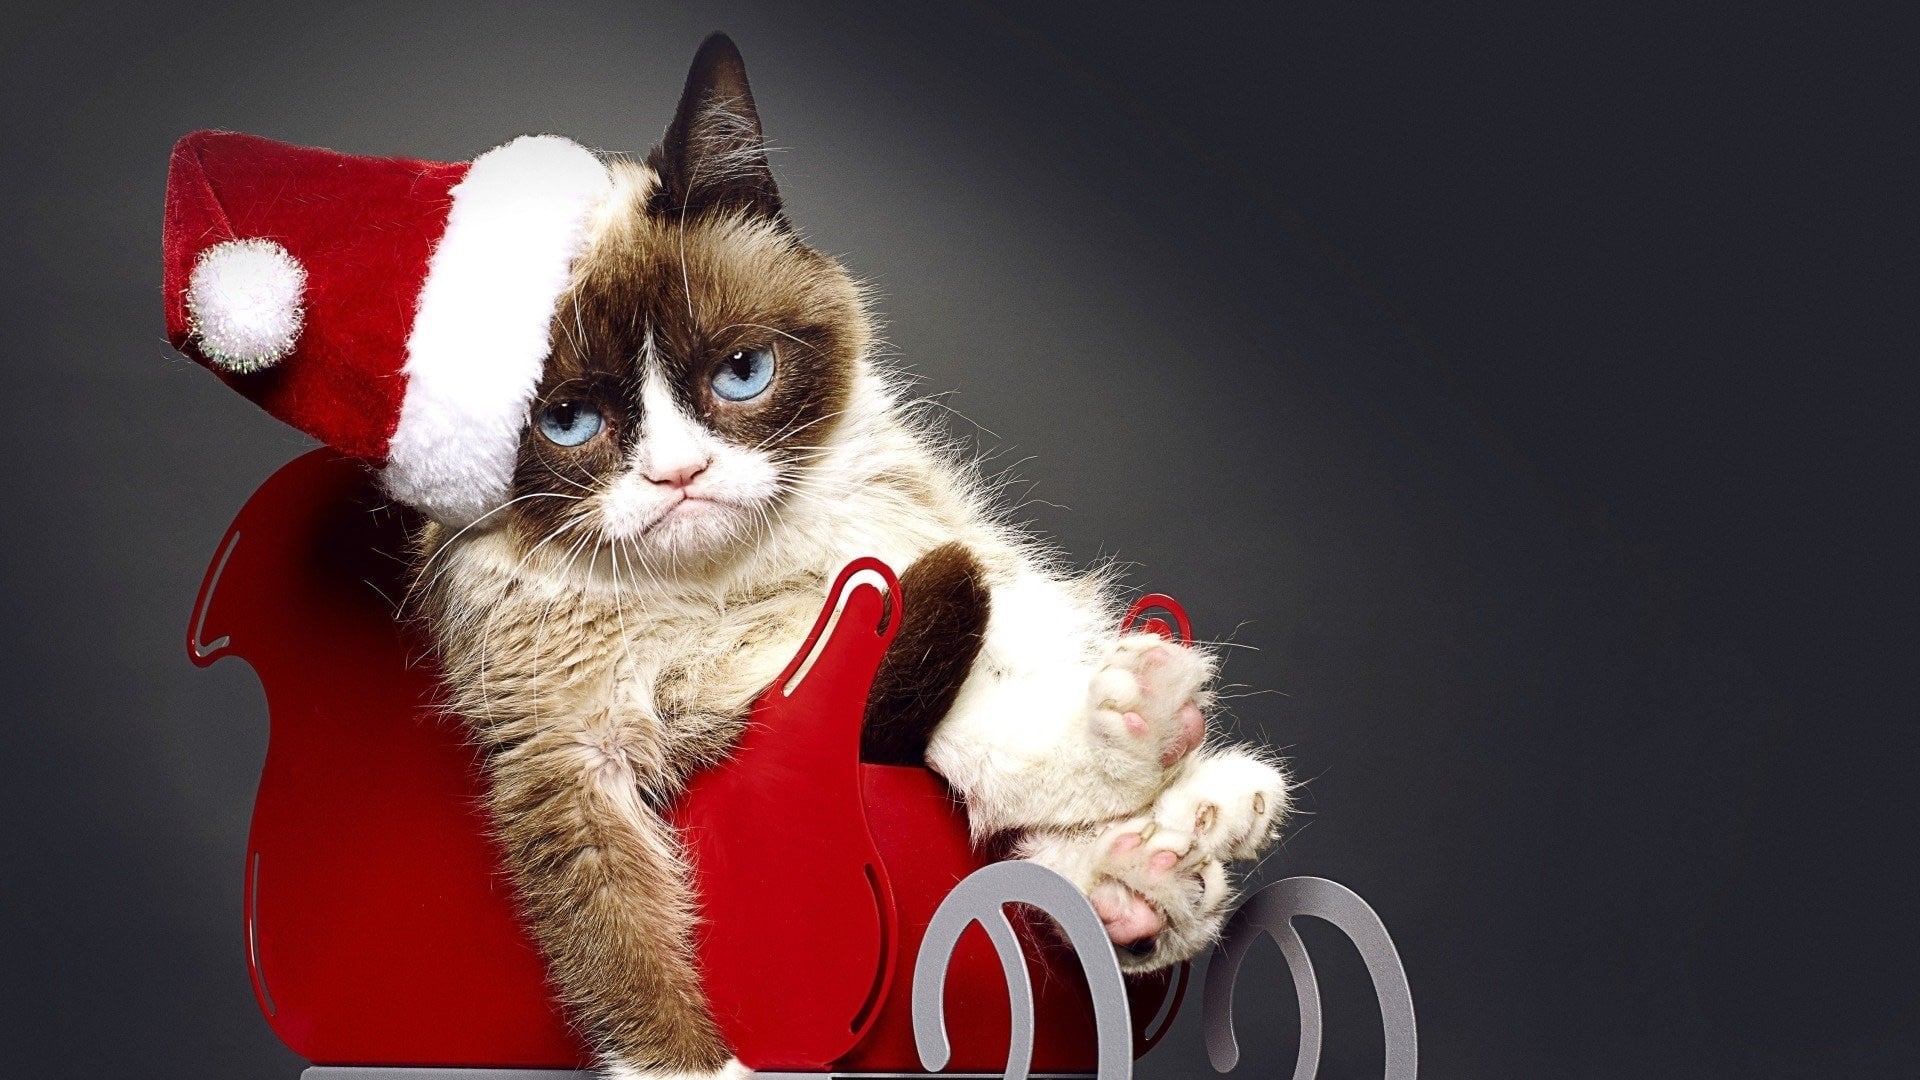 Grumpy Cat's miesestes Weihnachtsfest ever (2014)